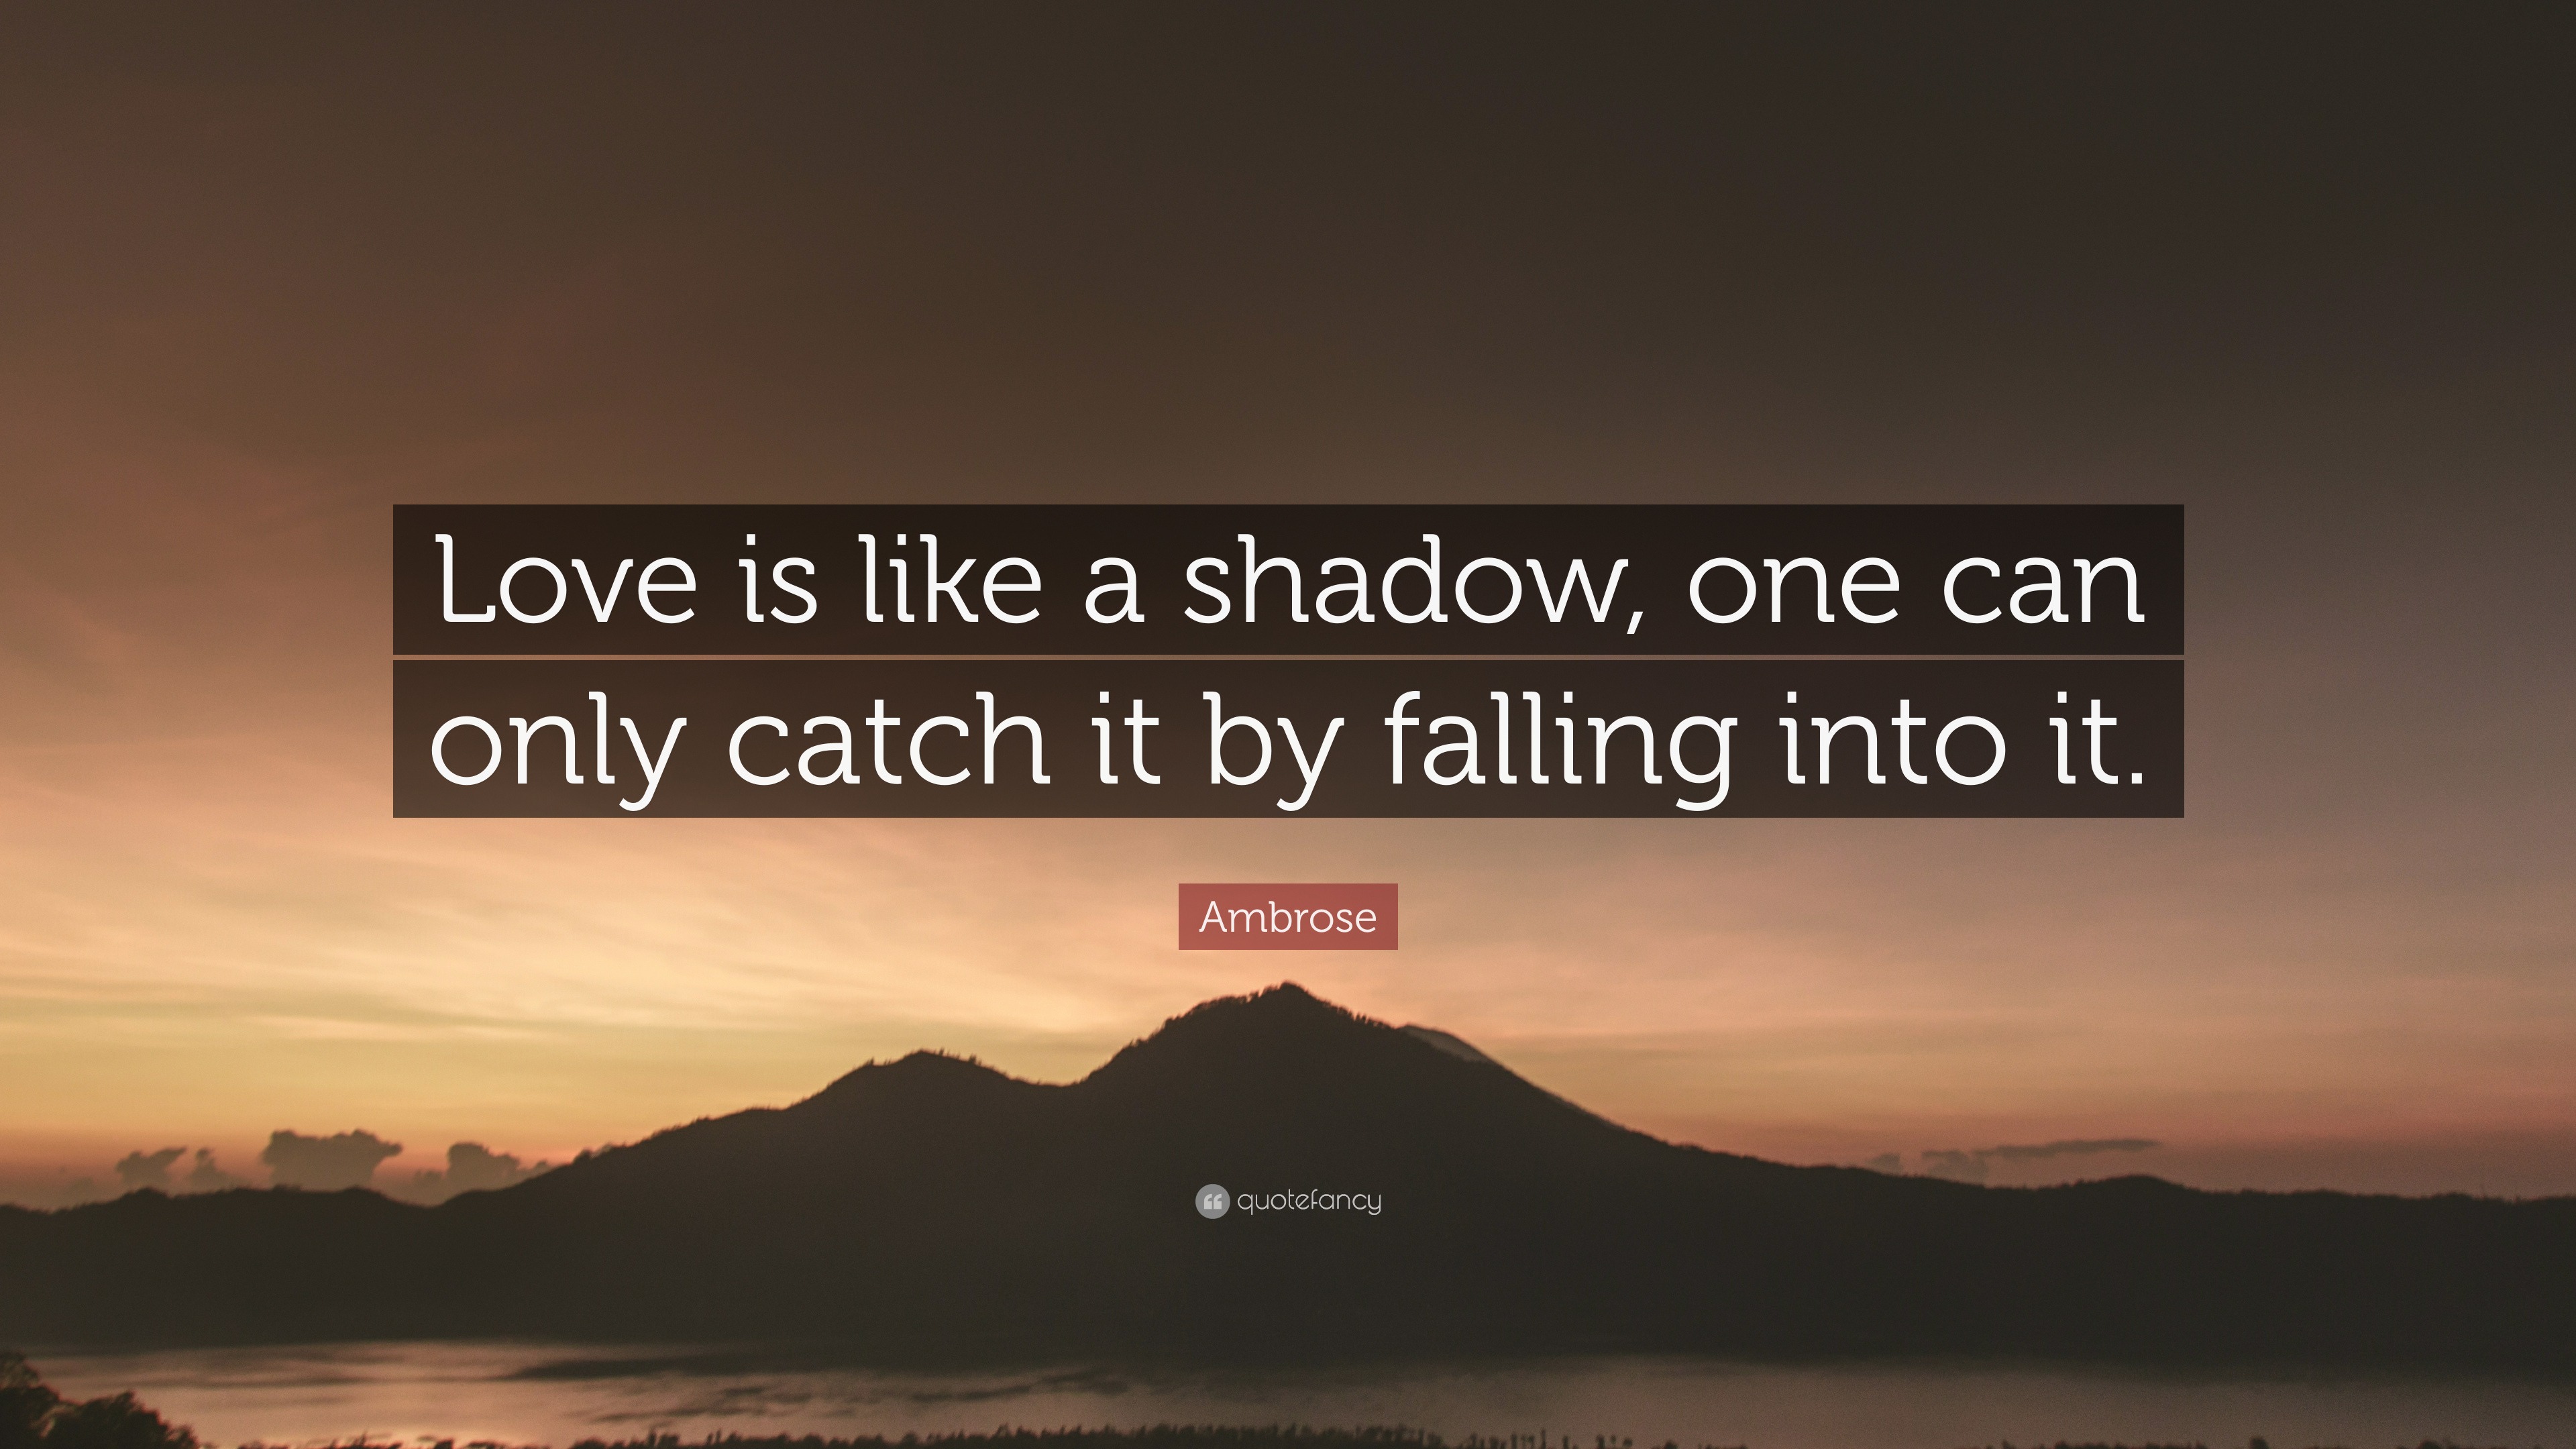 Ambrose Quote “Love is like a shadow one can only catch it by